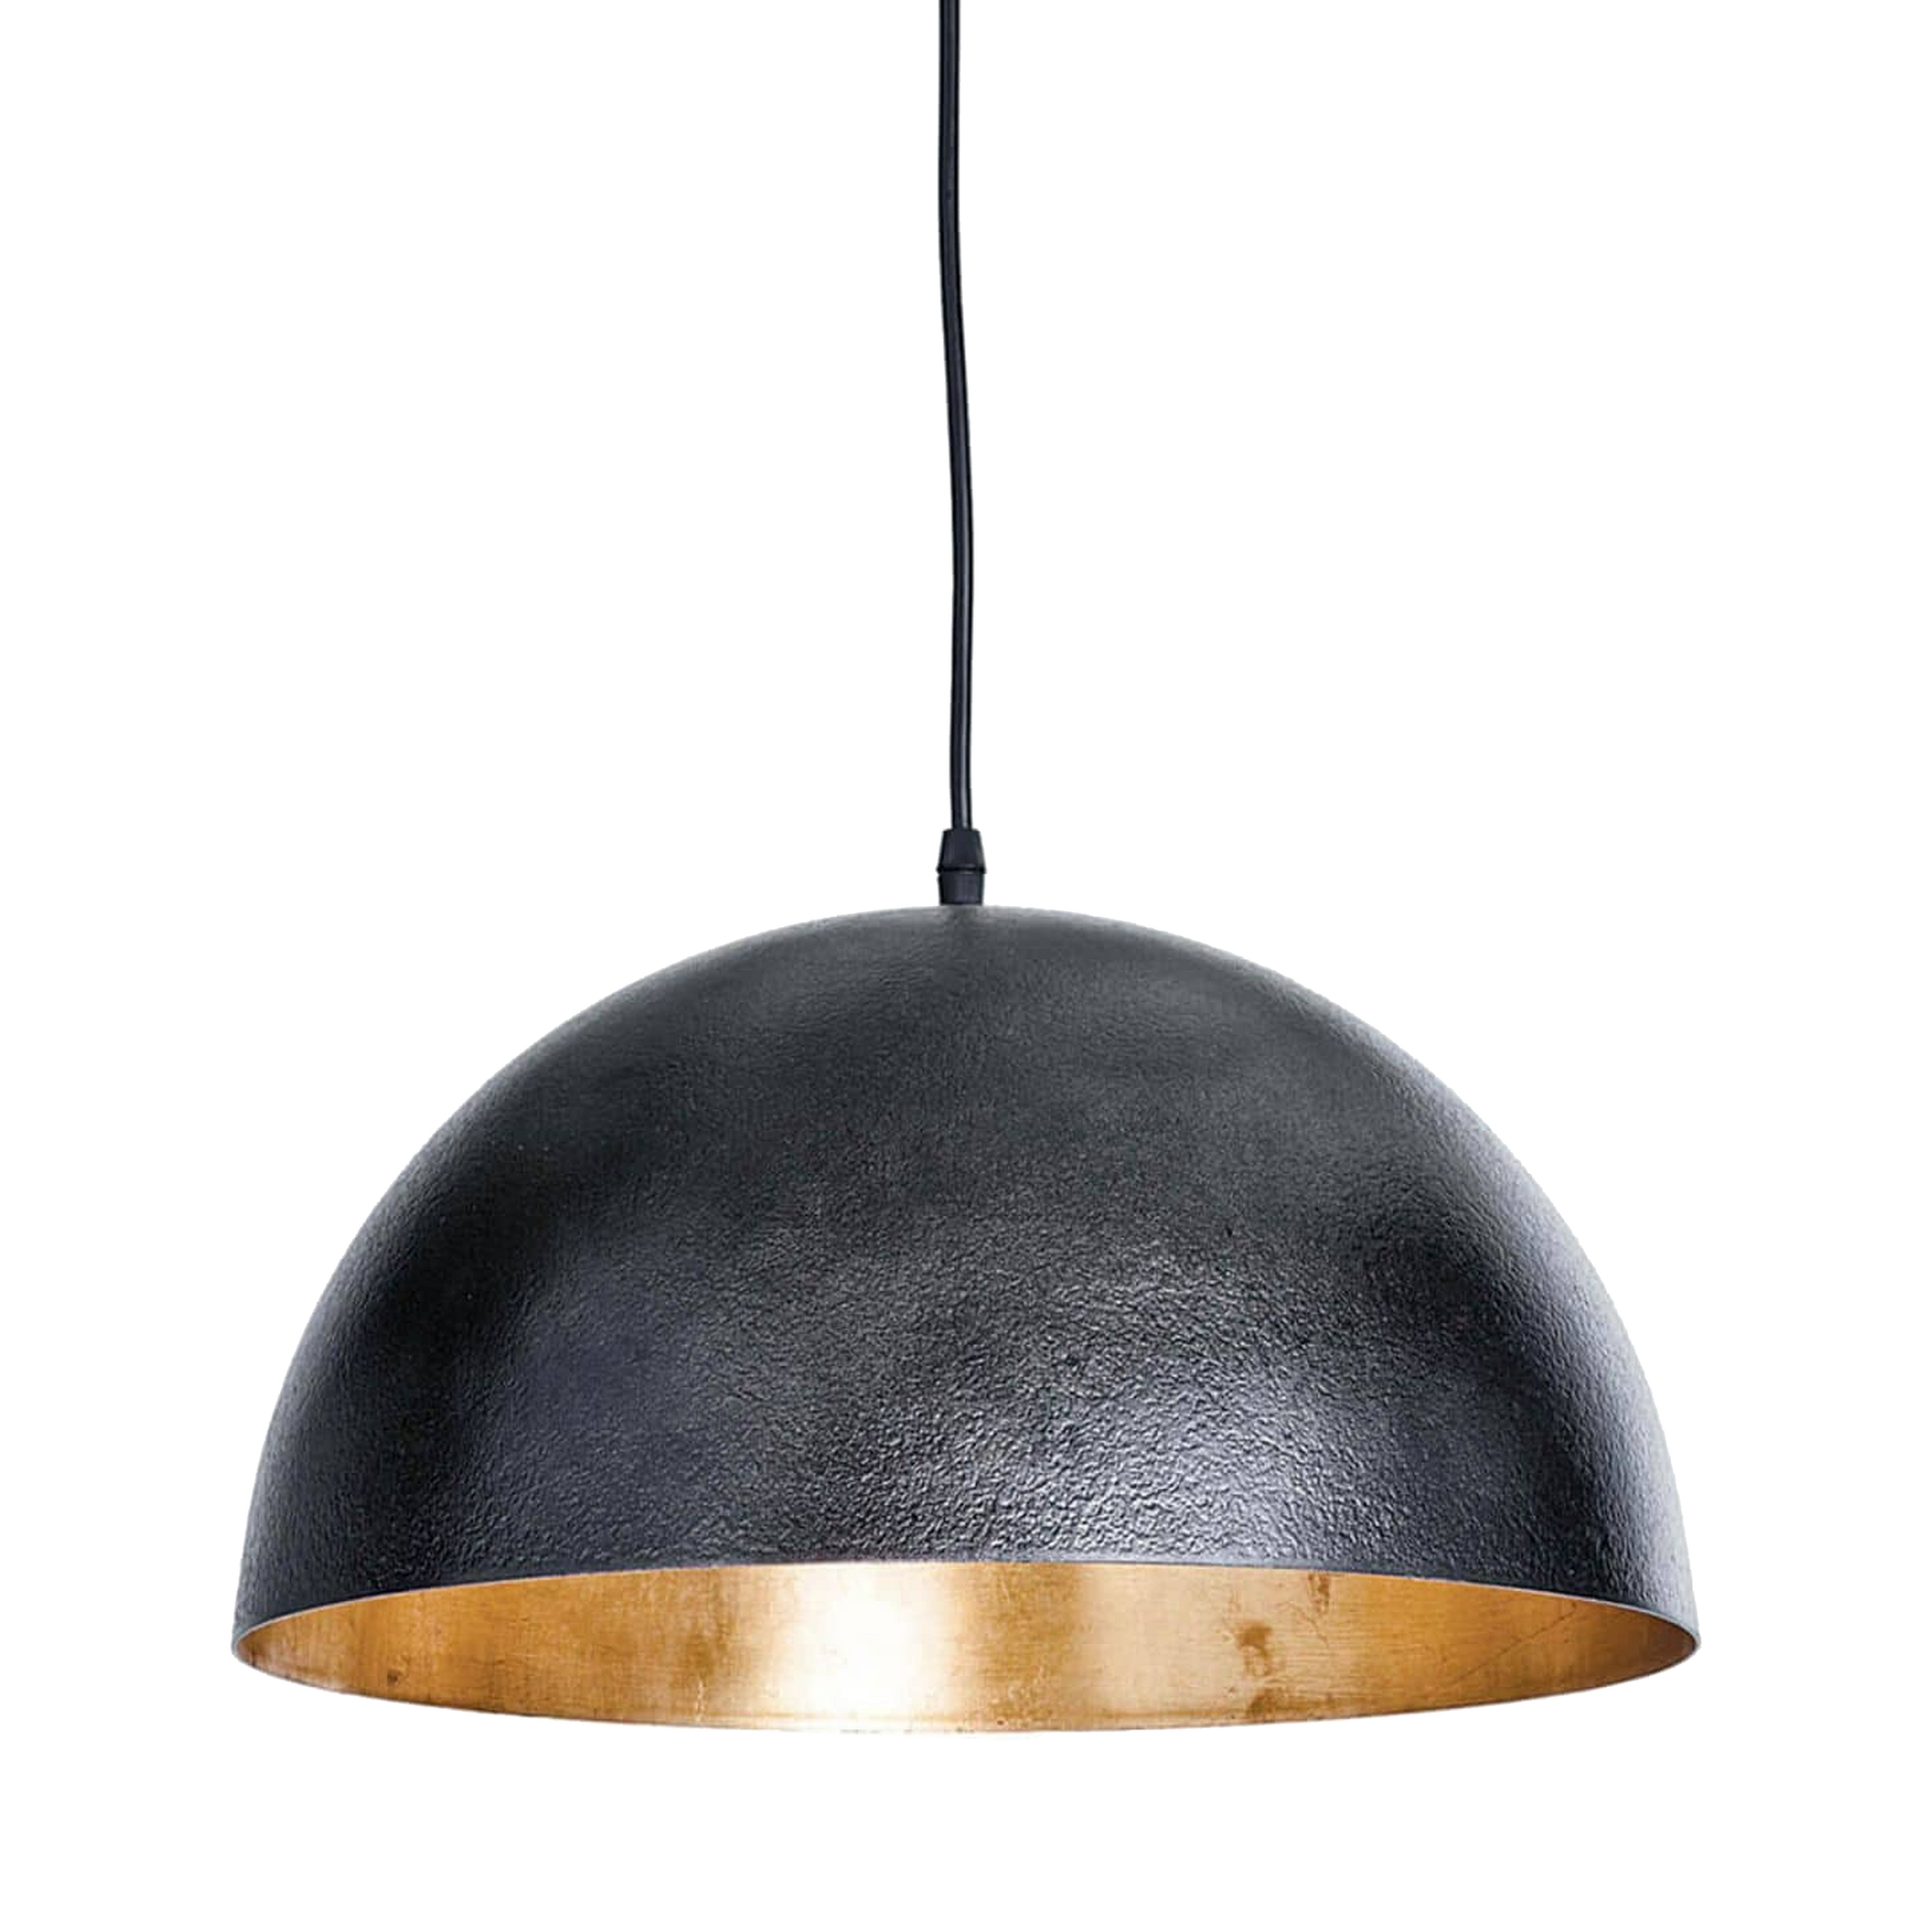 A simple dome shade brings sleek minimalism to the mix.